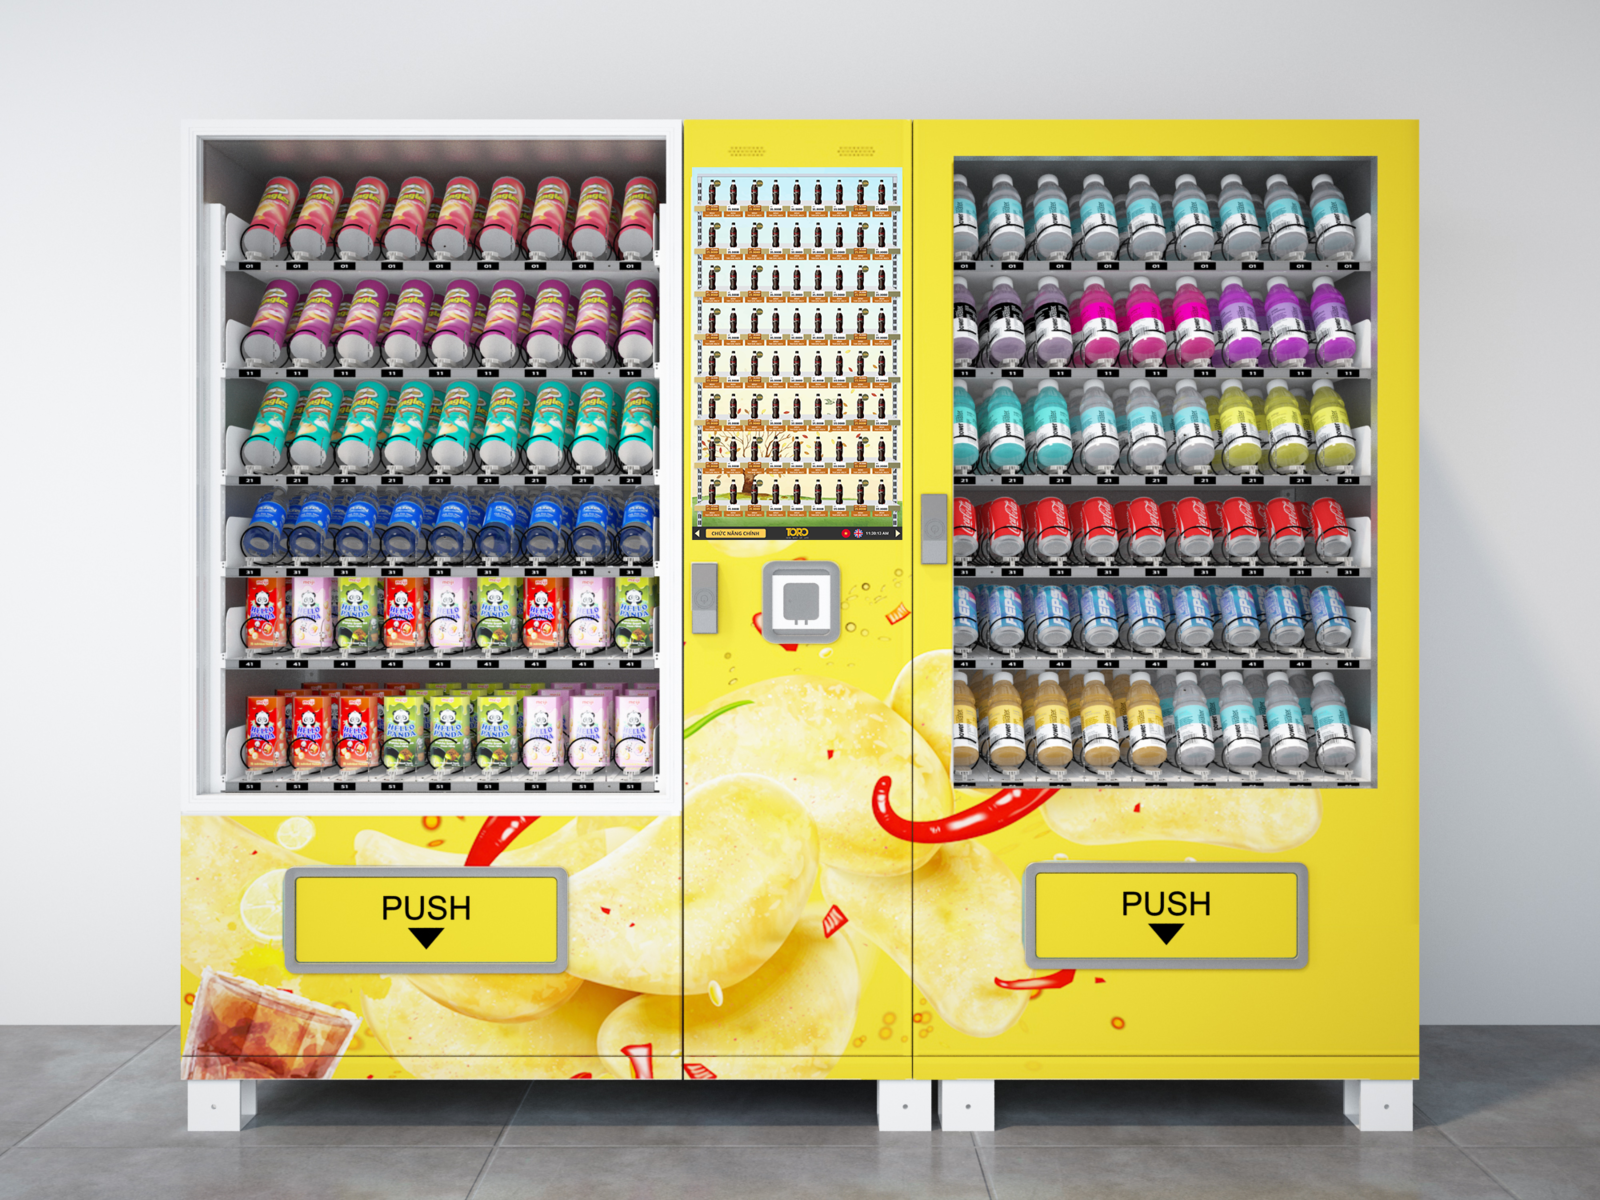 Download Mockup Vending Machine Interface Autumn Version By Uxui Monster On Dribbble